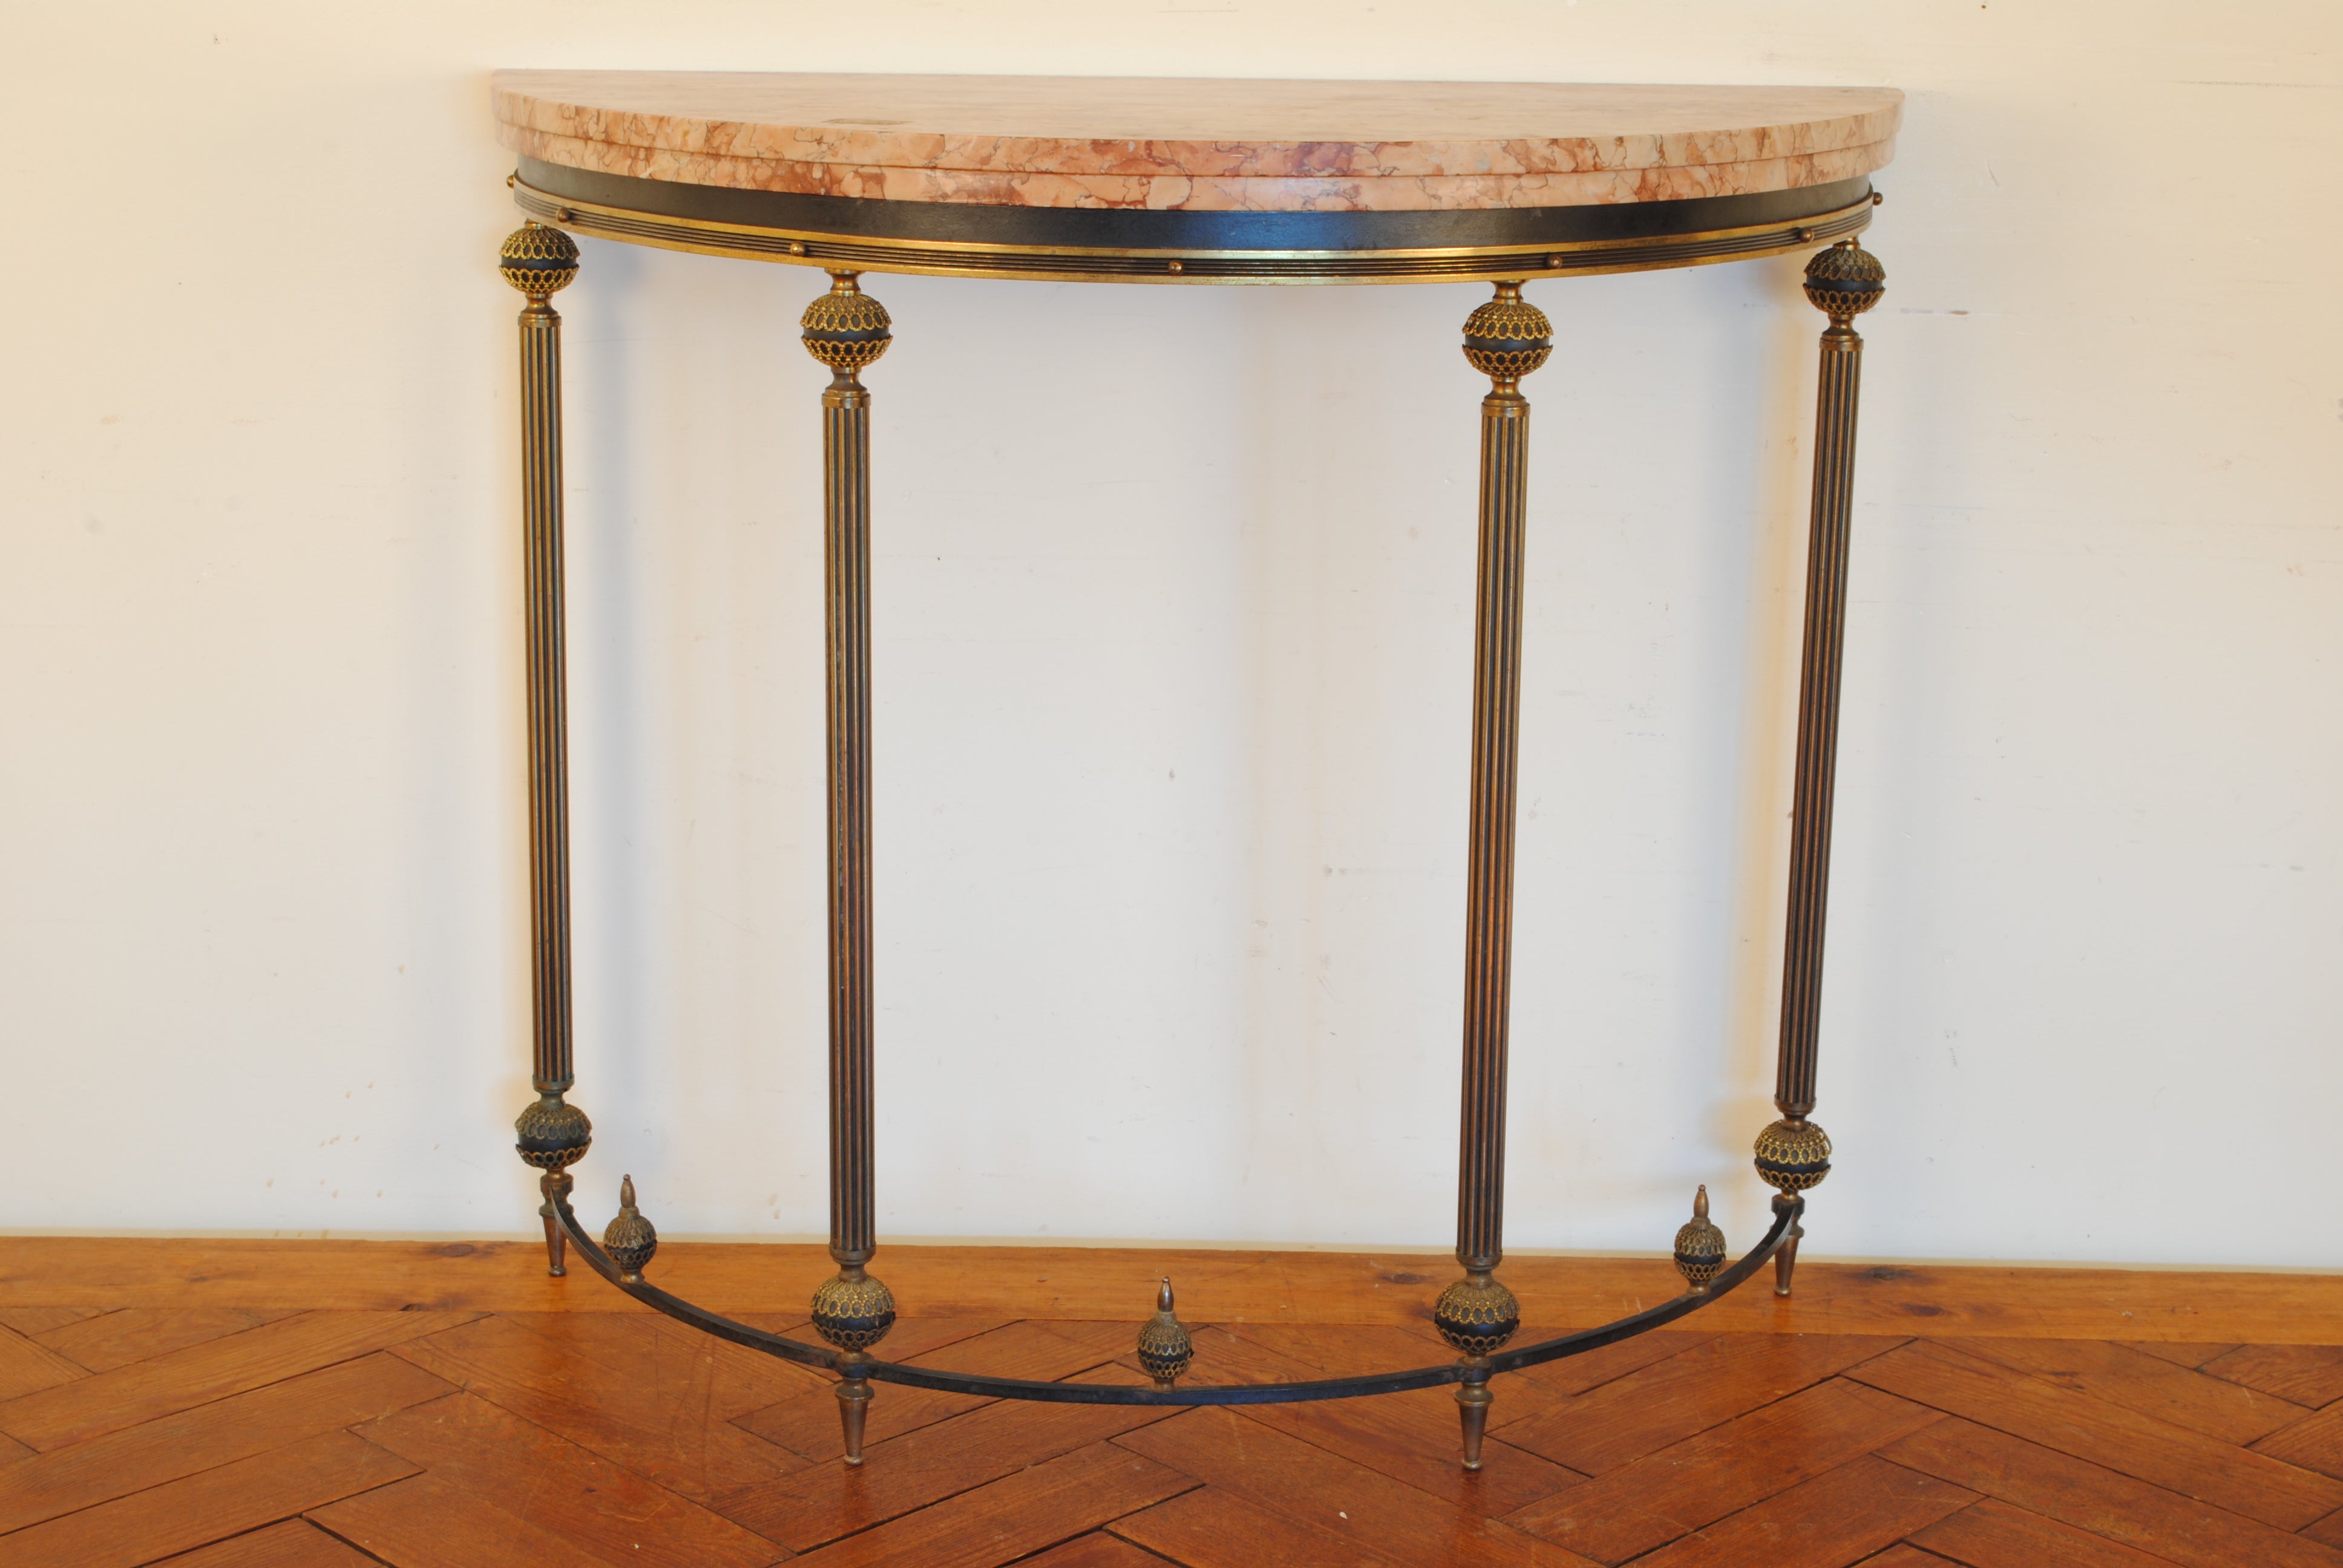 A Continental Louis XVI-Style Gilt and Patinated Bronze Demilune Console